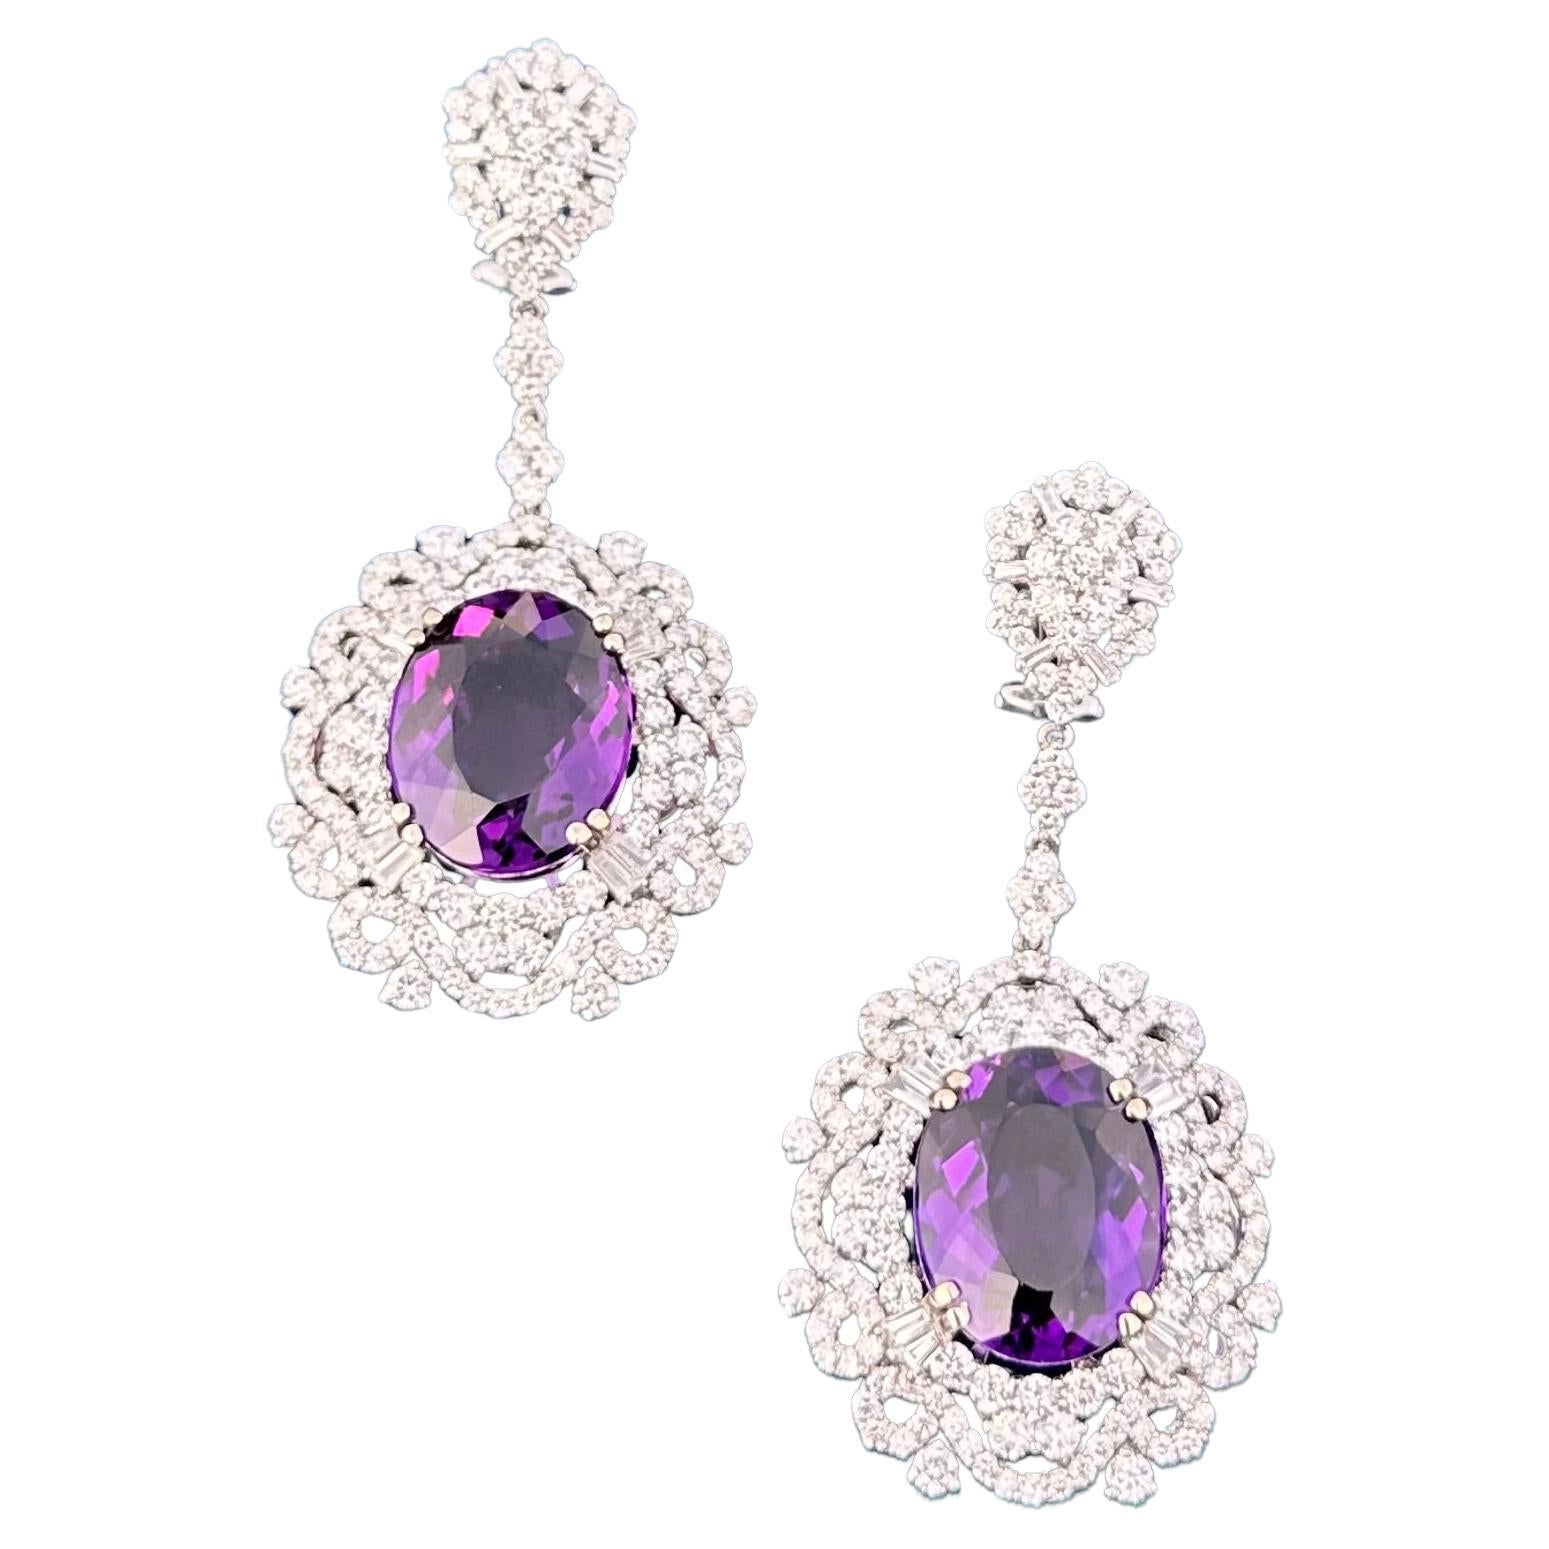 Exquisite Pair of 42.49 Carat Amethyst and Diamond 18K White Gold Earrings For Sale